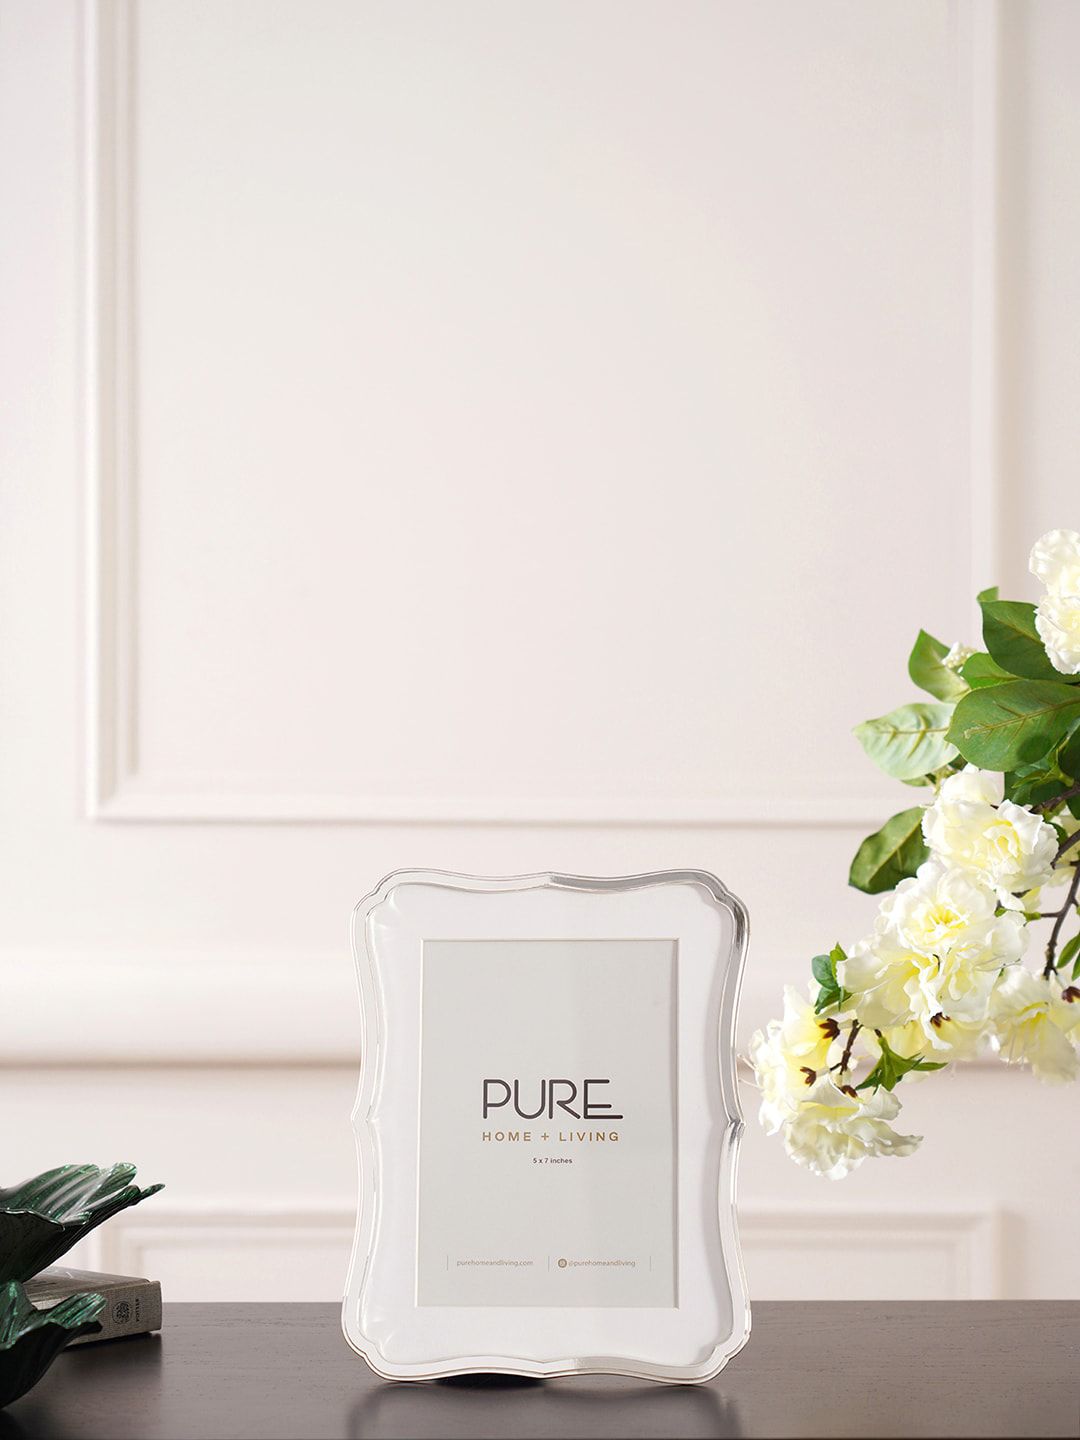 Pure Home and Living Silver-Plated Solid Photo Frames Price in India